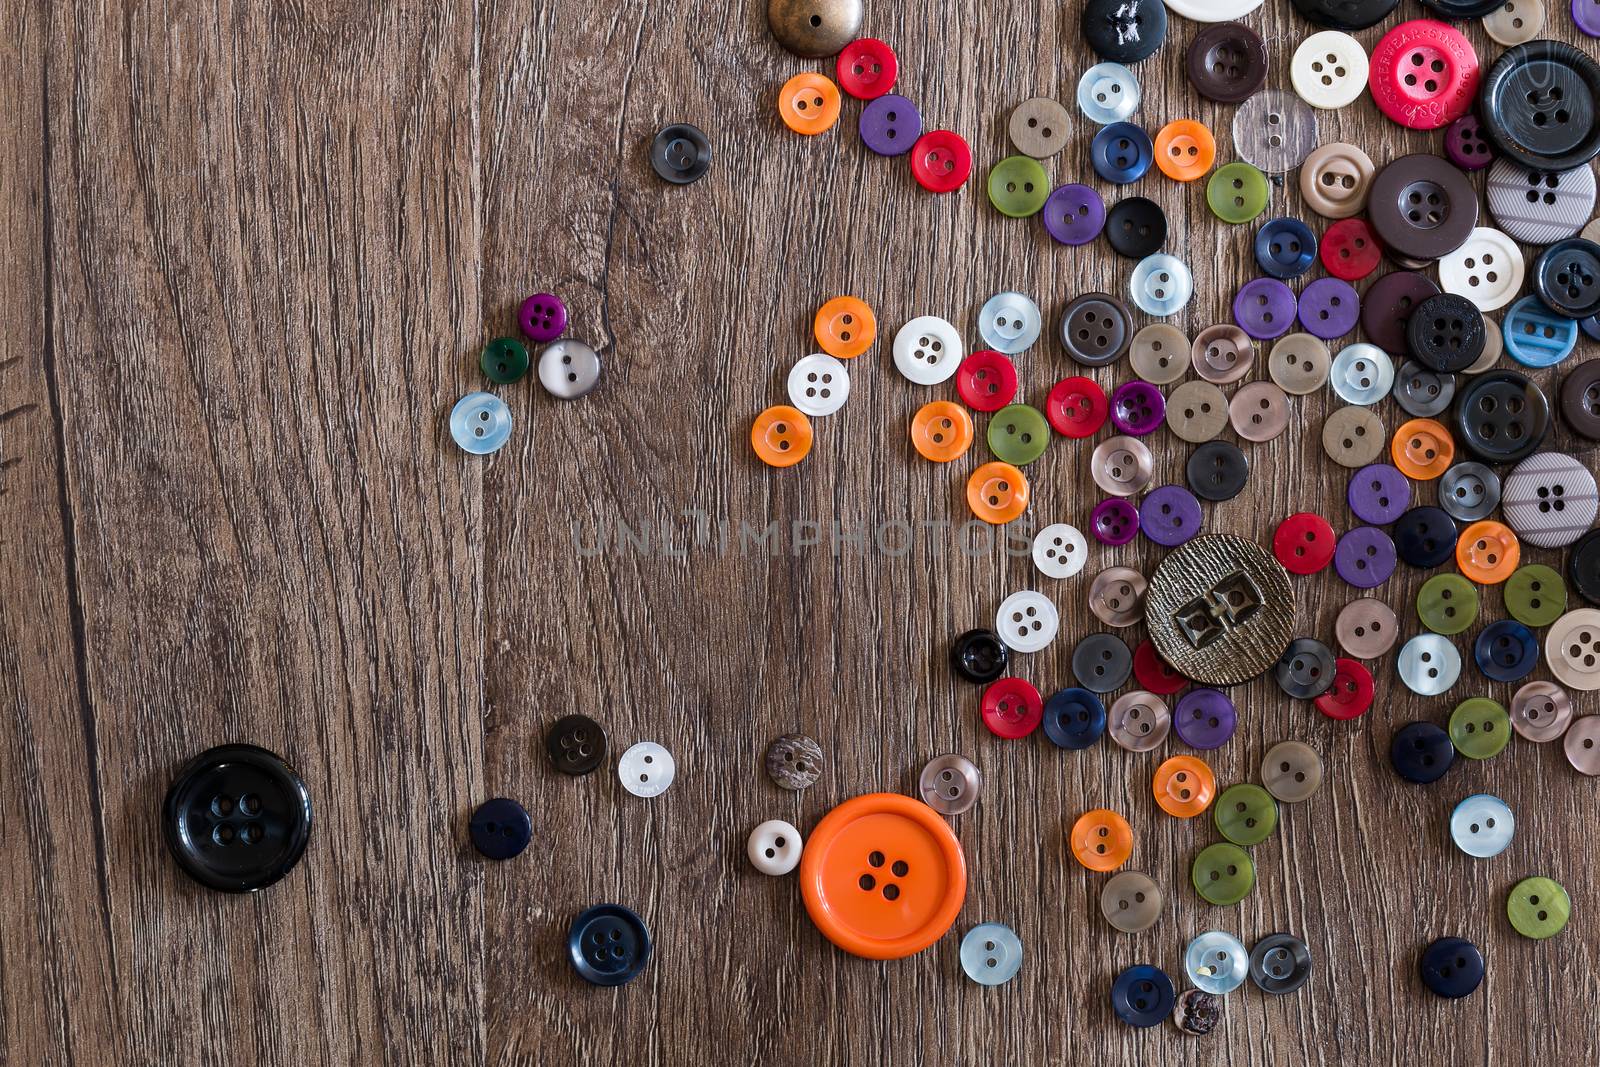 Random Scattering of small multicolored buttons on a wooden floor boards